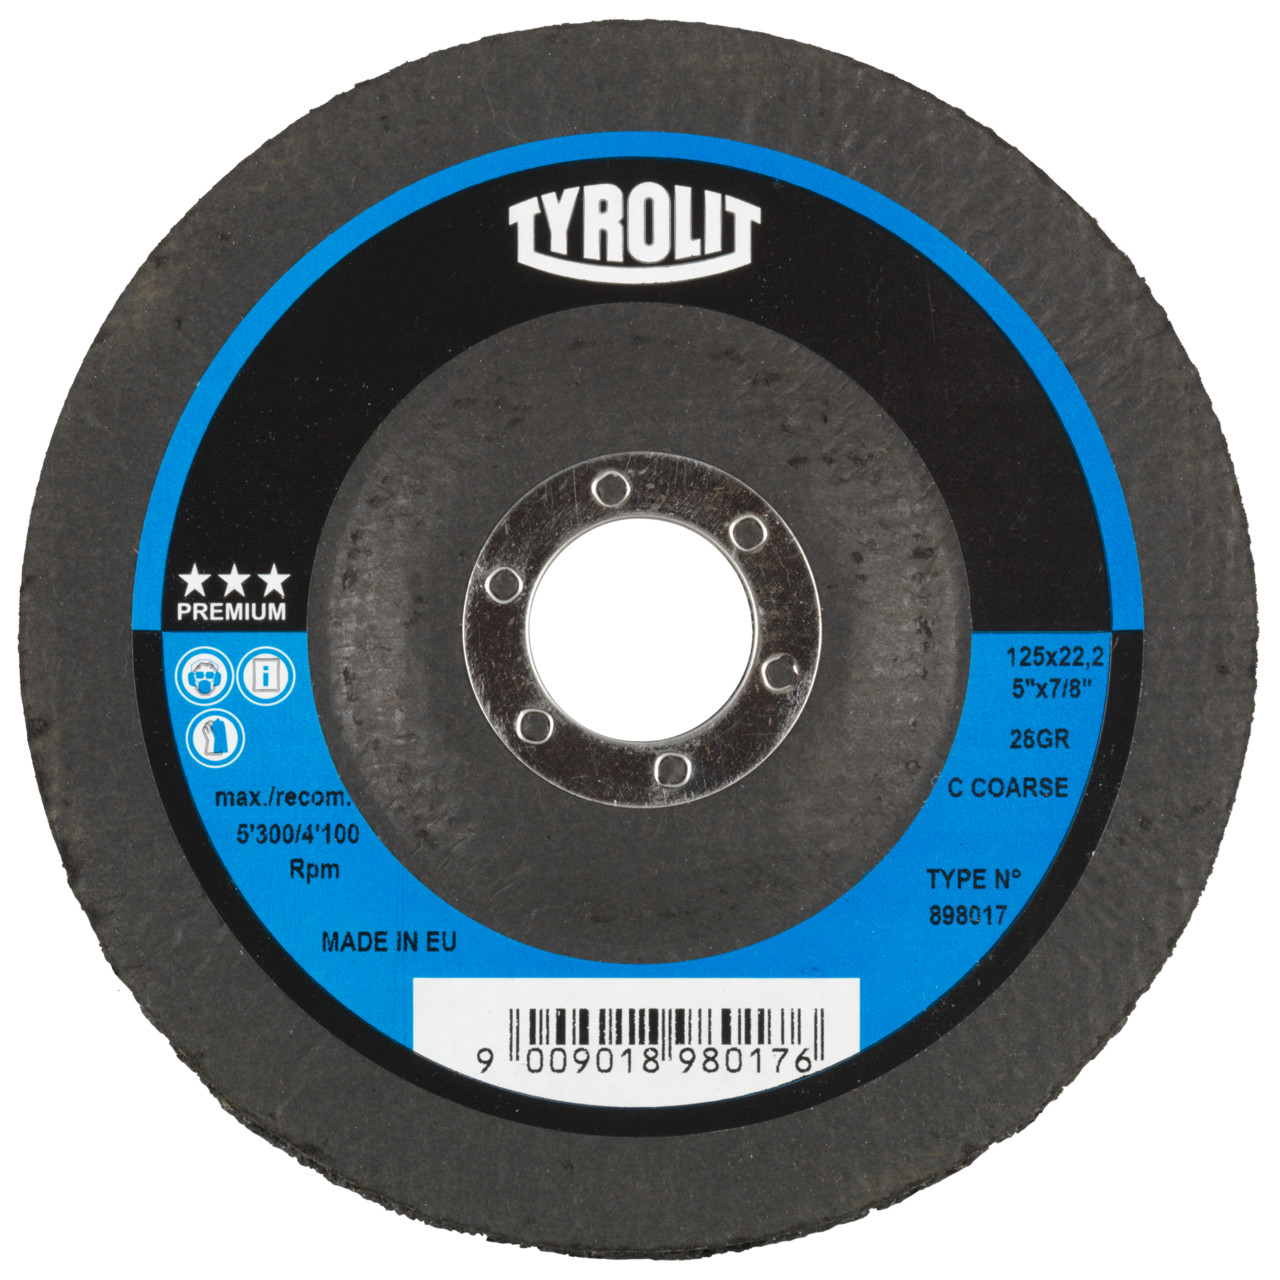 Tyrolit Coarse cleaning disc DxH 115x22.2 Universally applicable, A EX. GROB, shape: 28, Art. 34547535 (formerly 34206236)